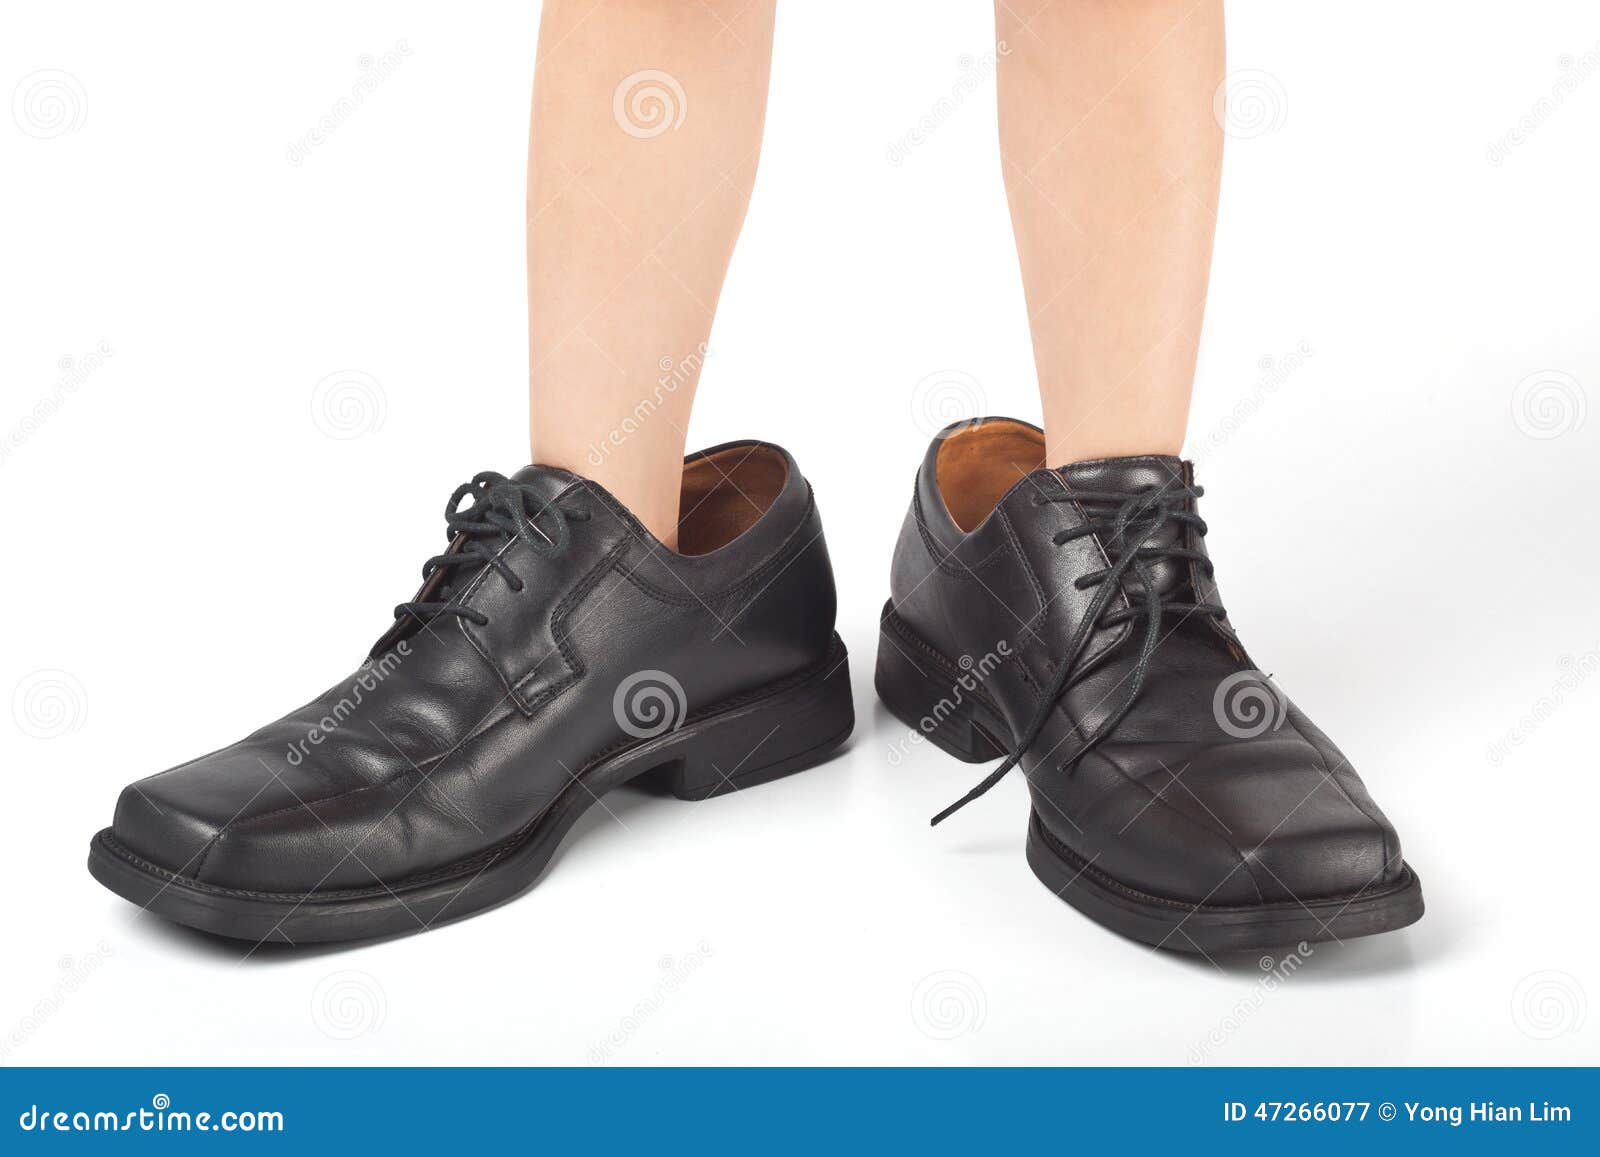 Little kid wearing adult's shoes that are too big.